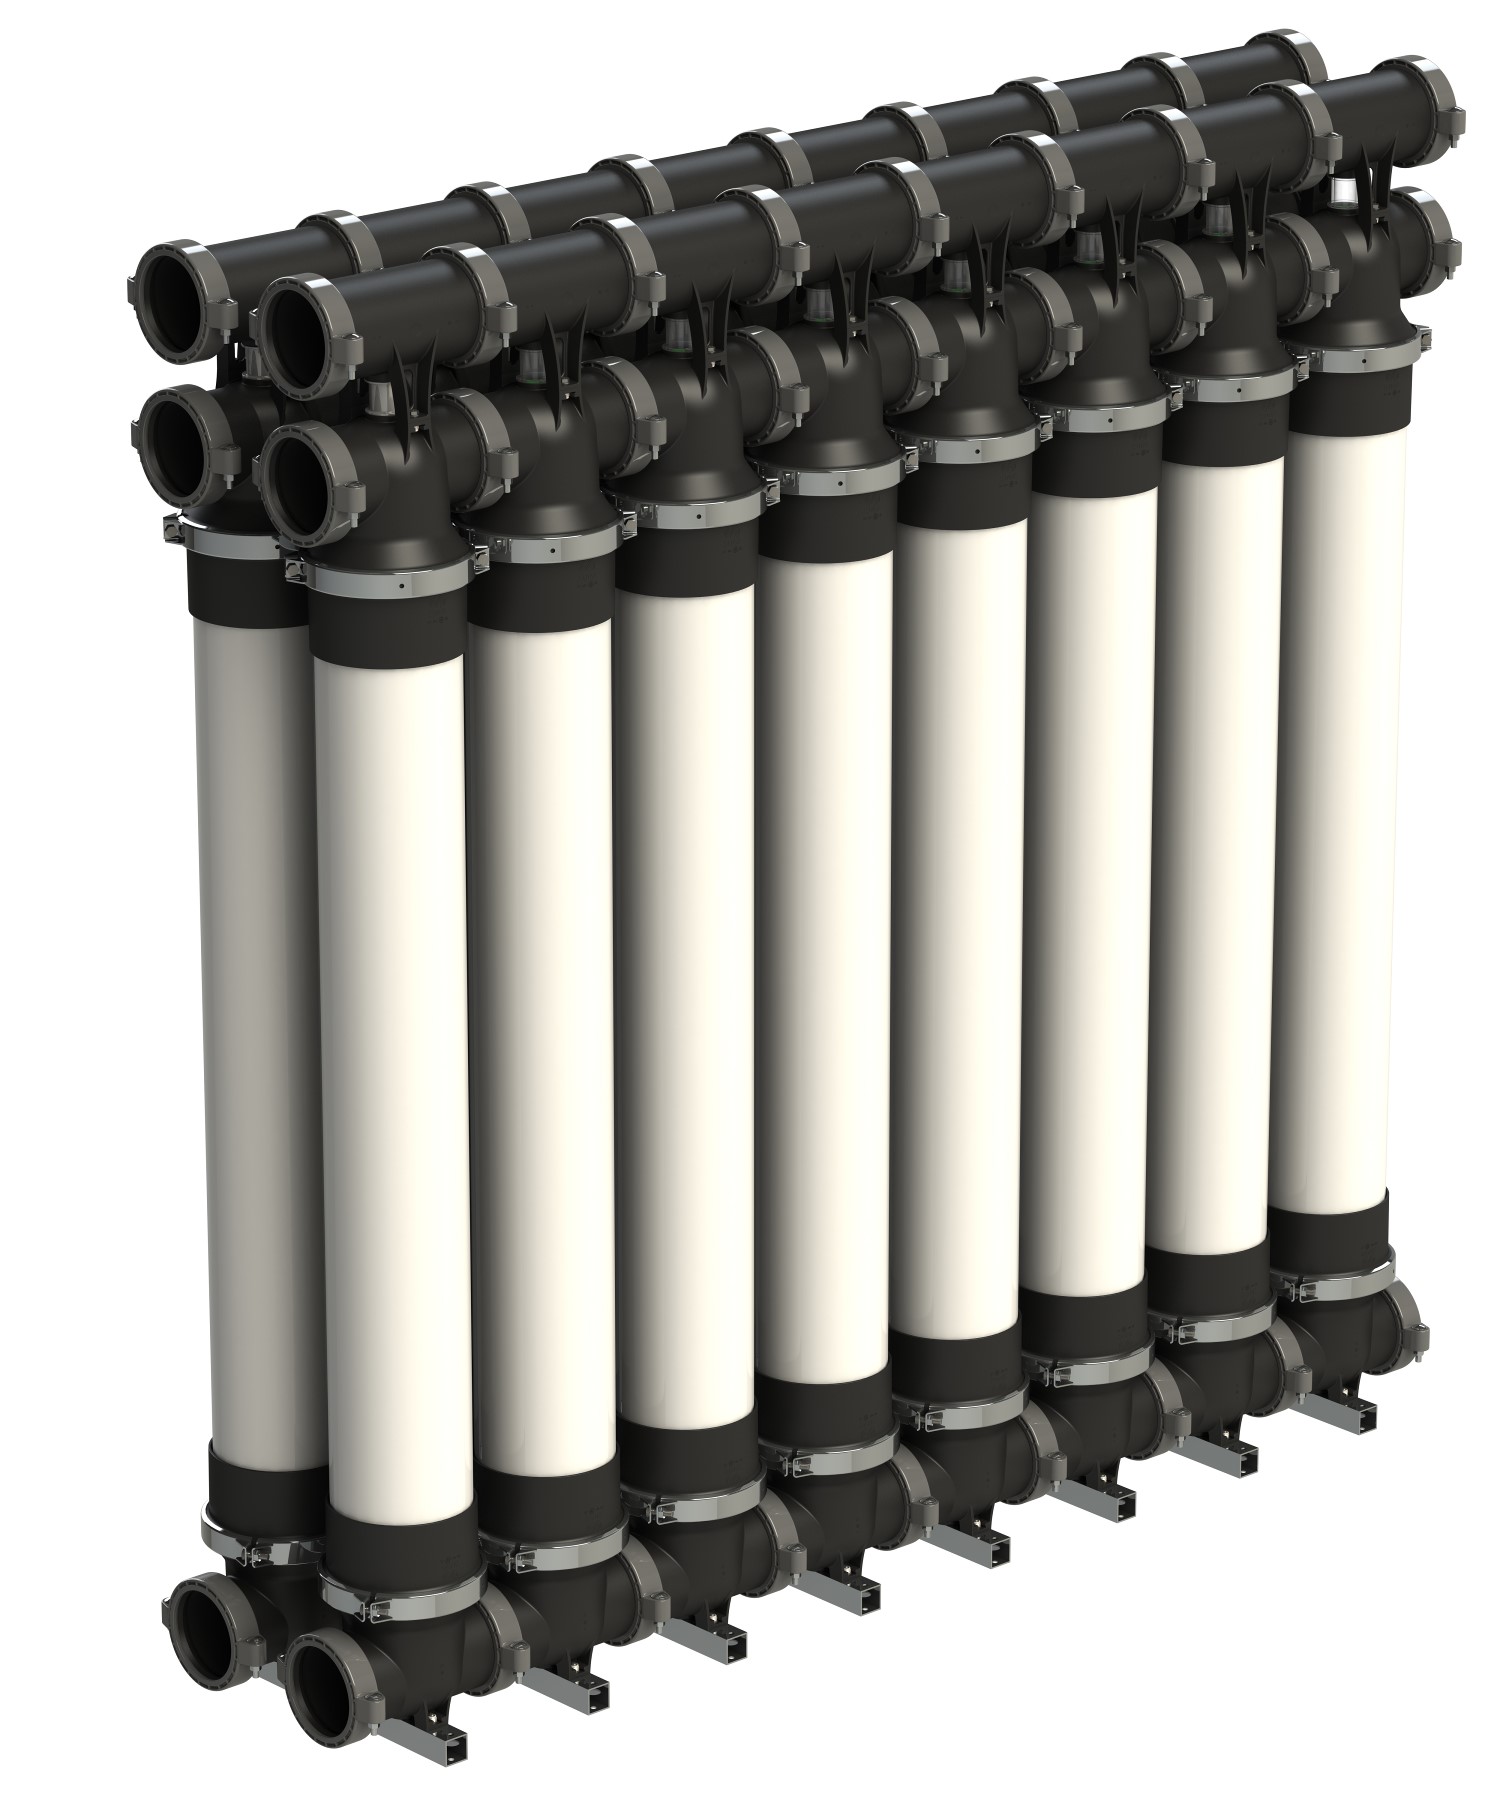 The ZeeWeed 700B-RMS is SUEZ Water Technologies & Solutions' new ultrafiltration rackless membrane system.